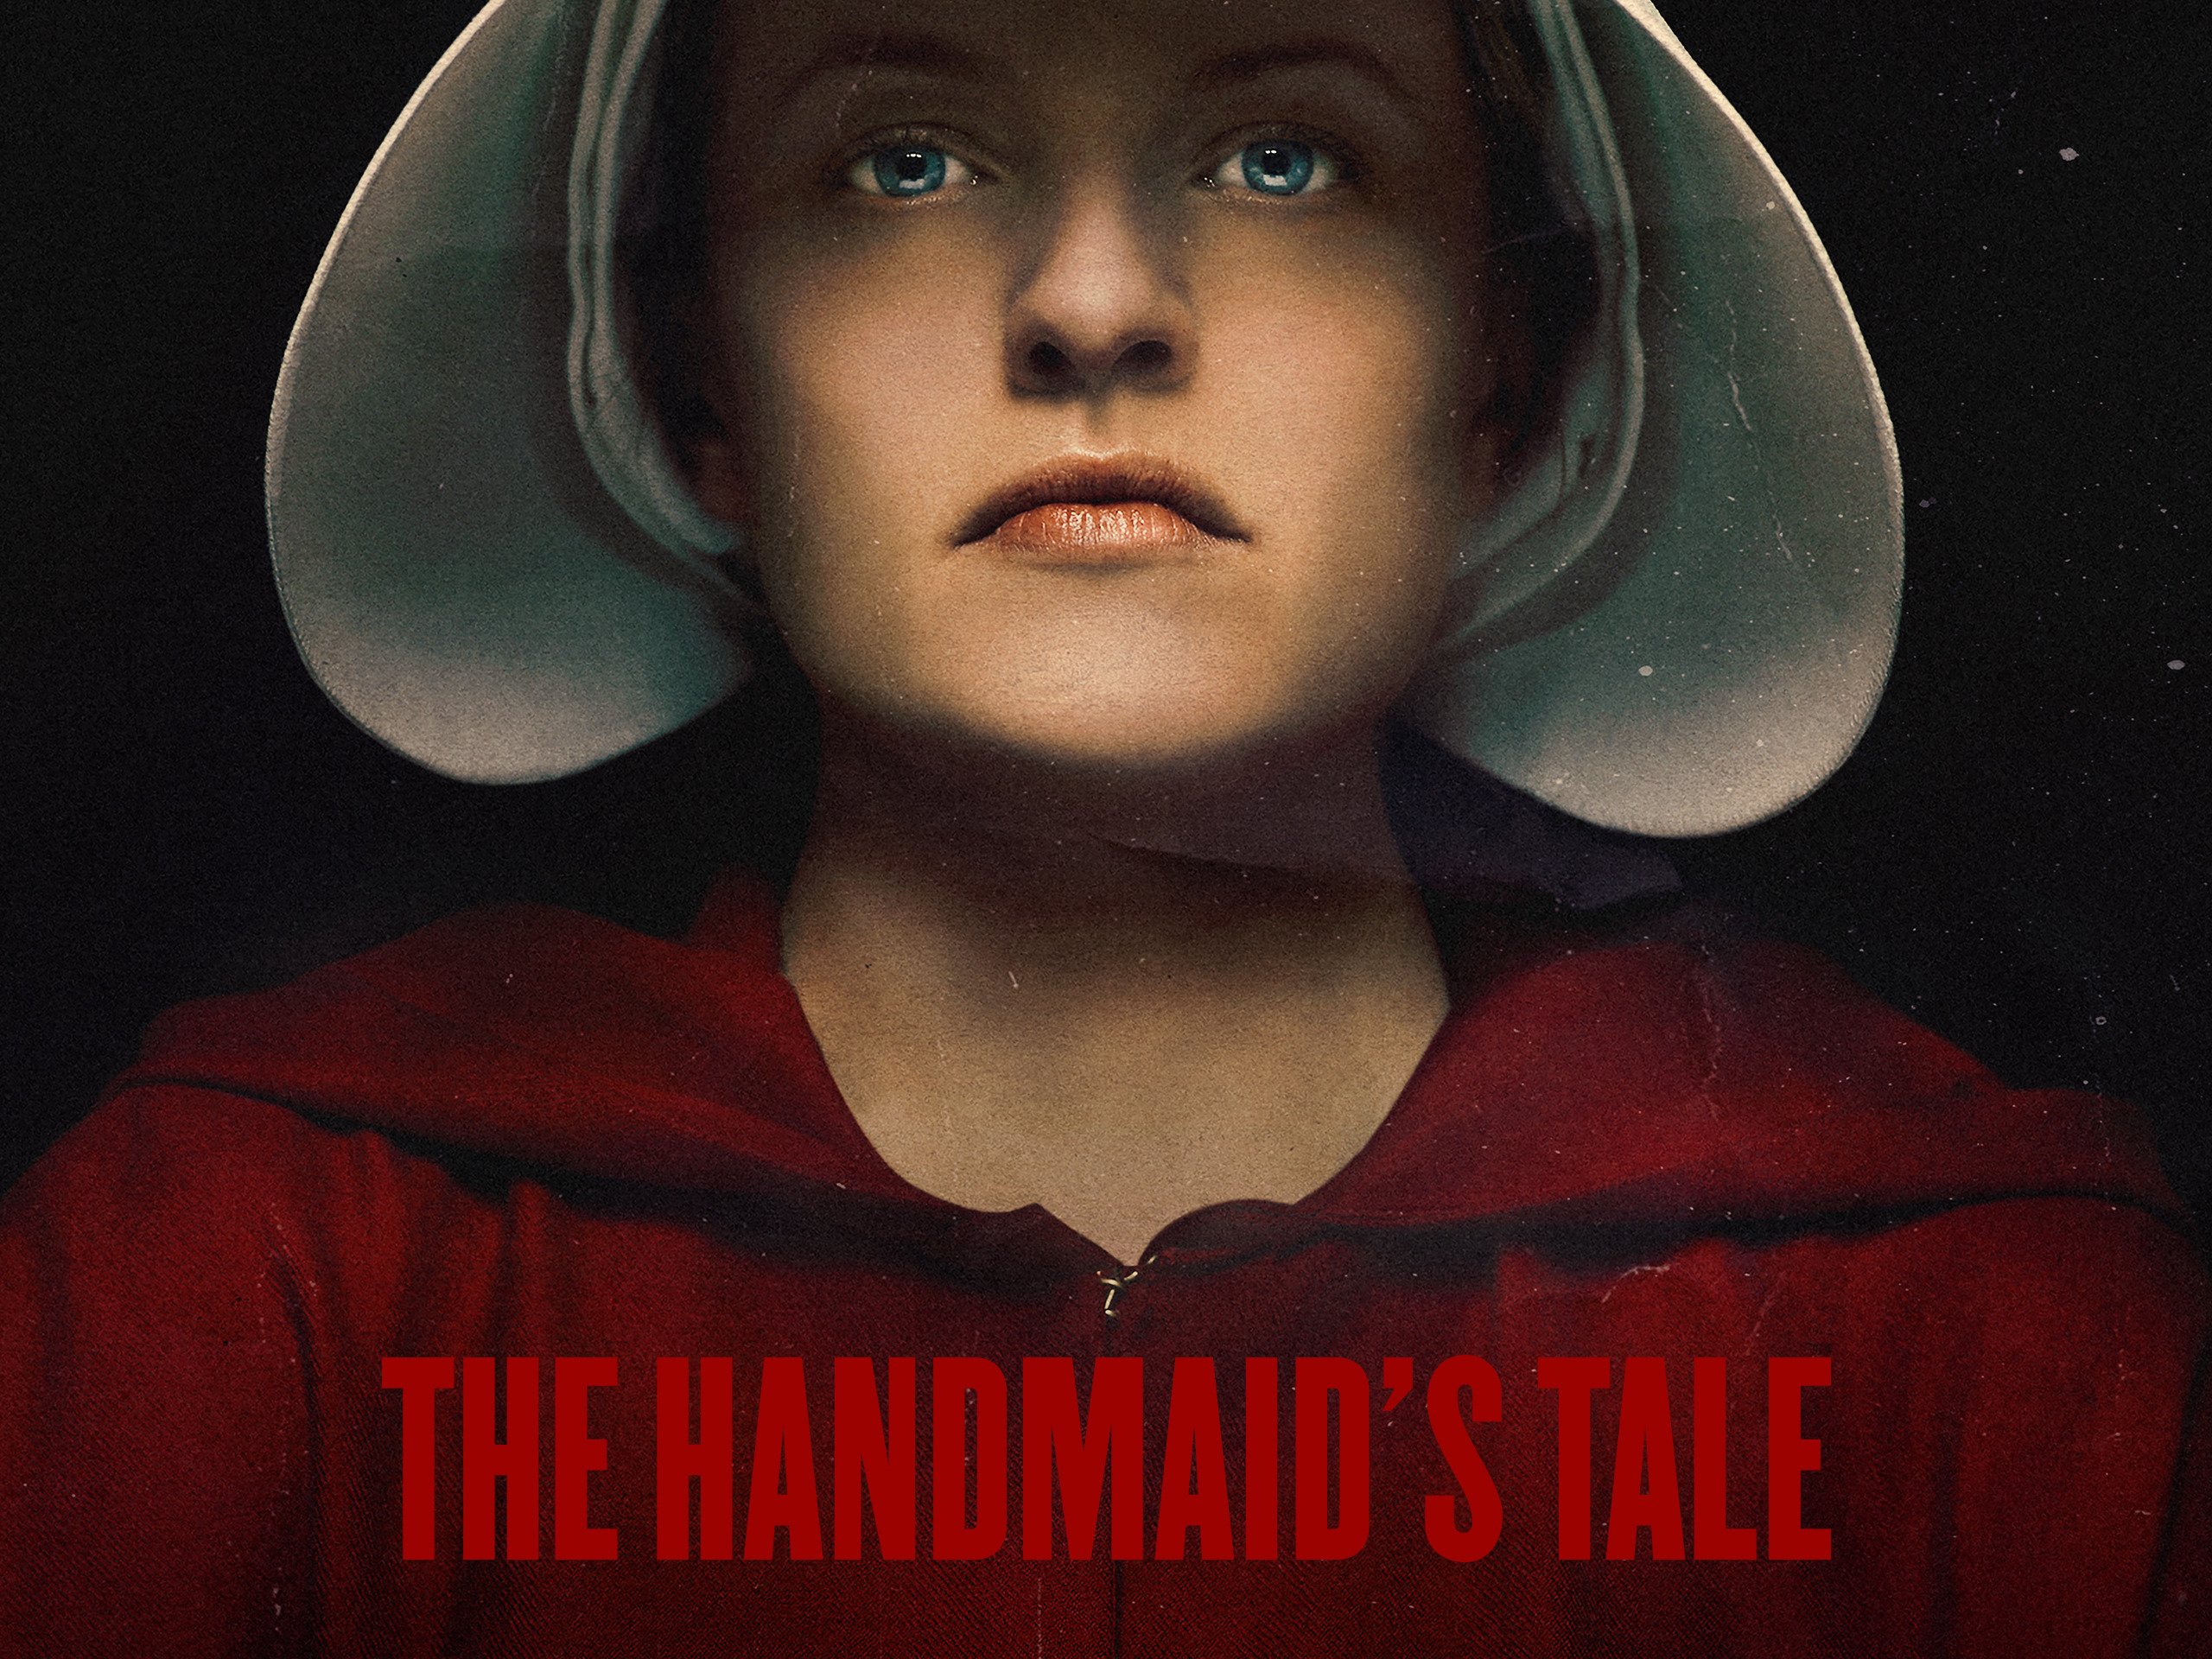 What Can We Expect From Season 5 of 'The Handmaid's Tale'? - The Teal Mango